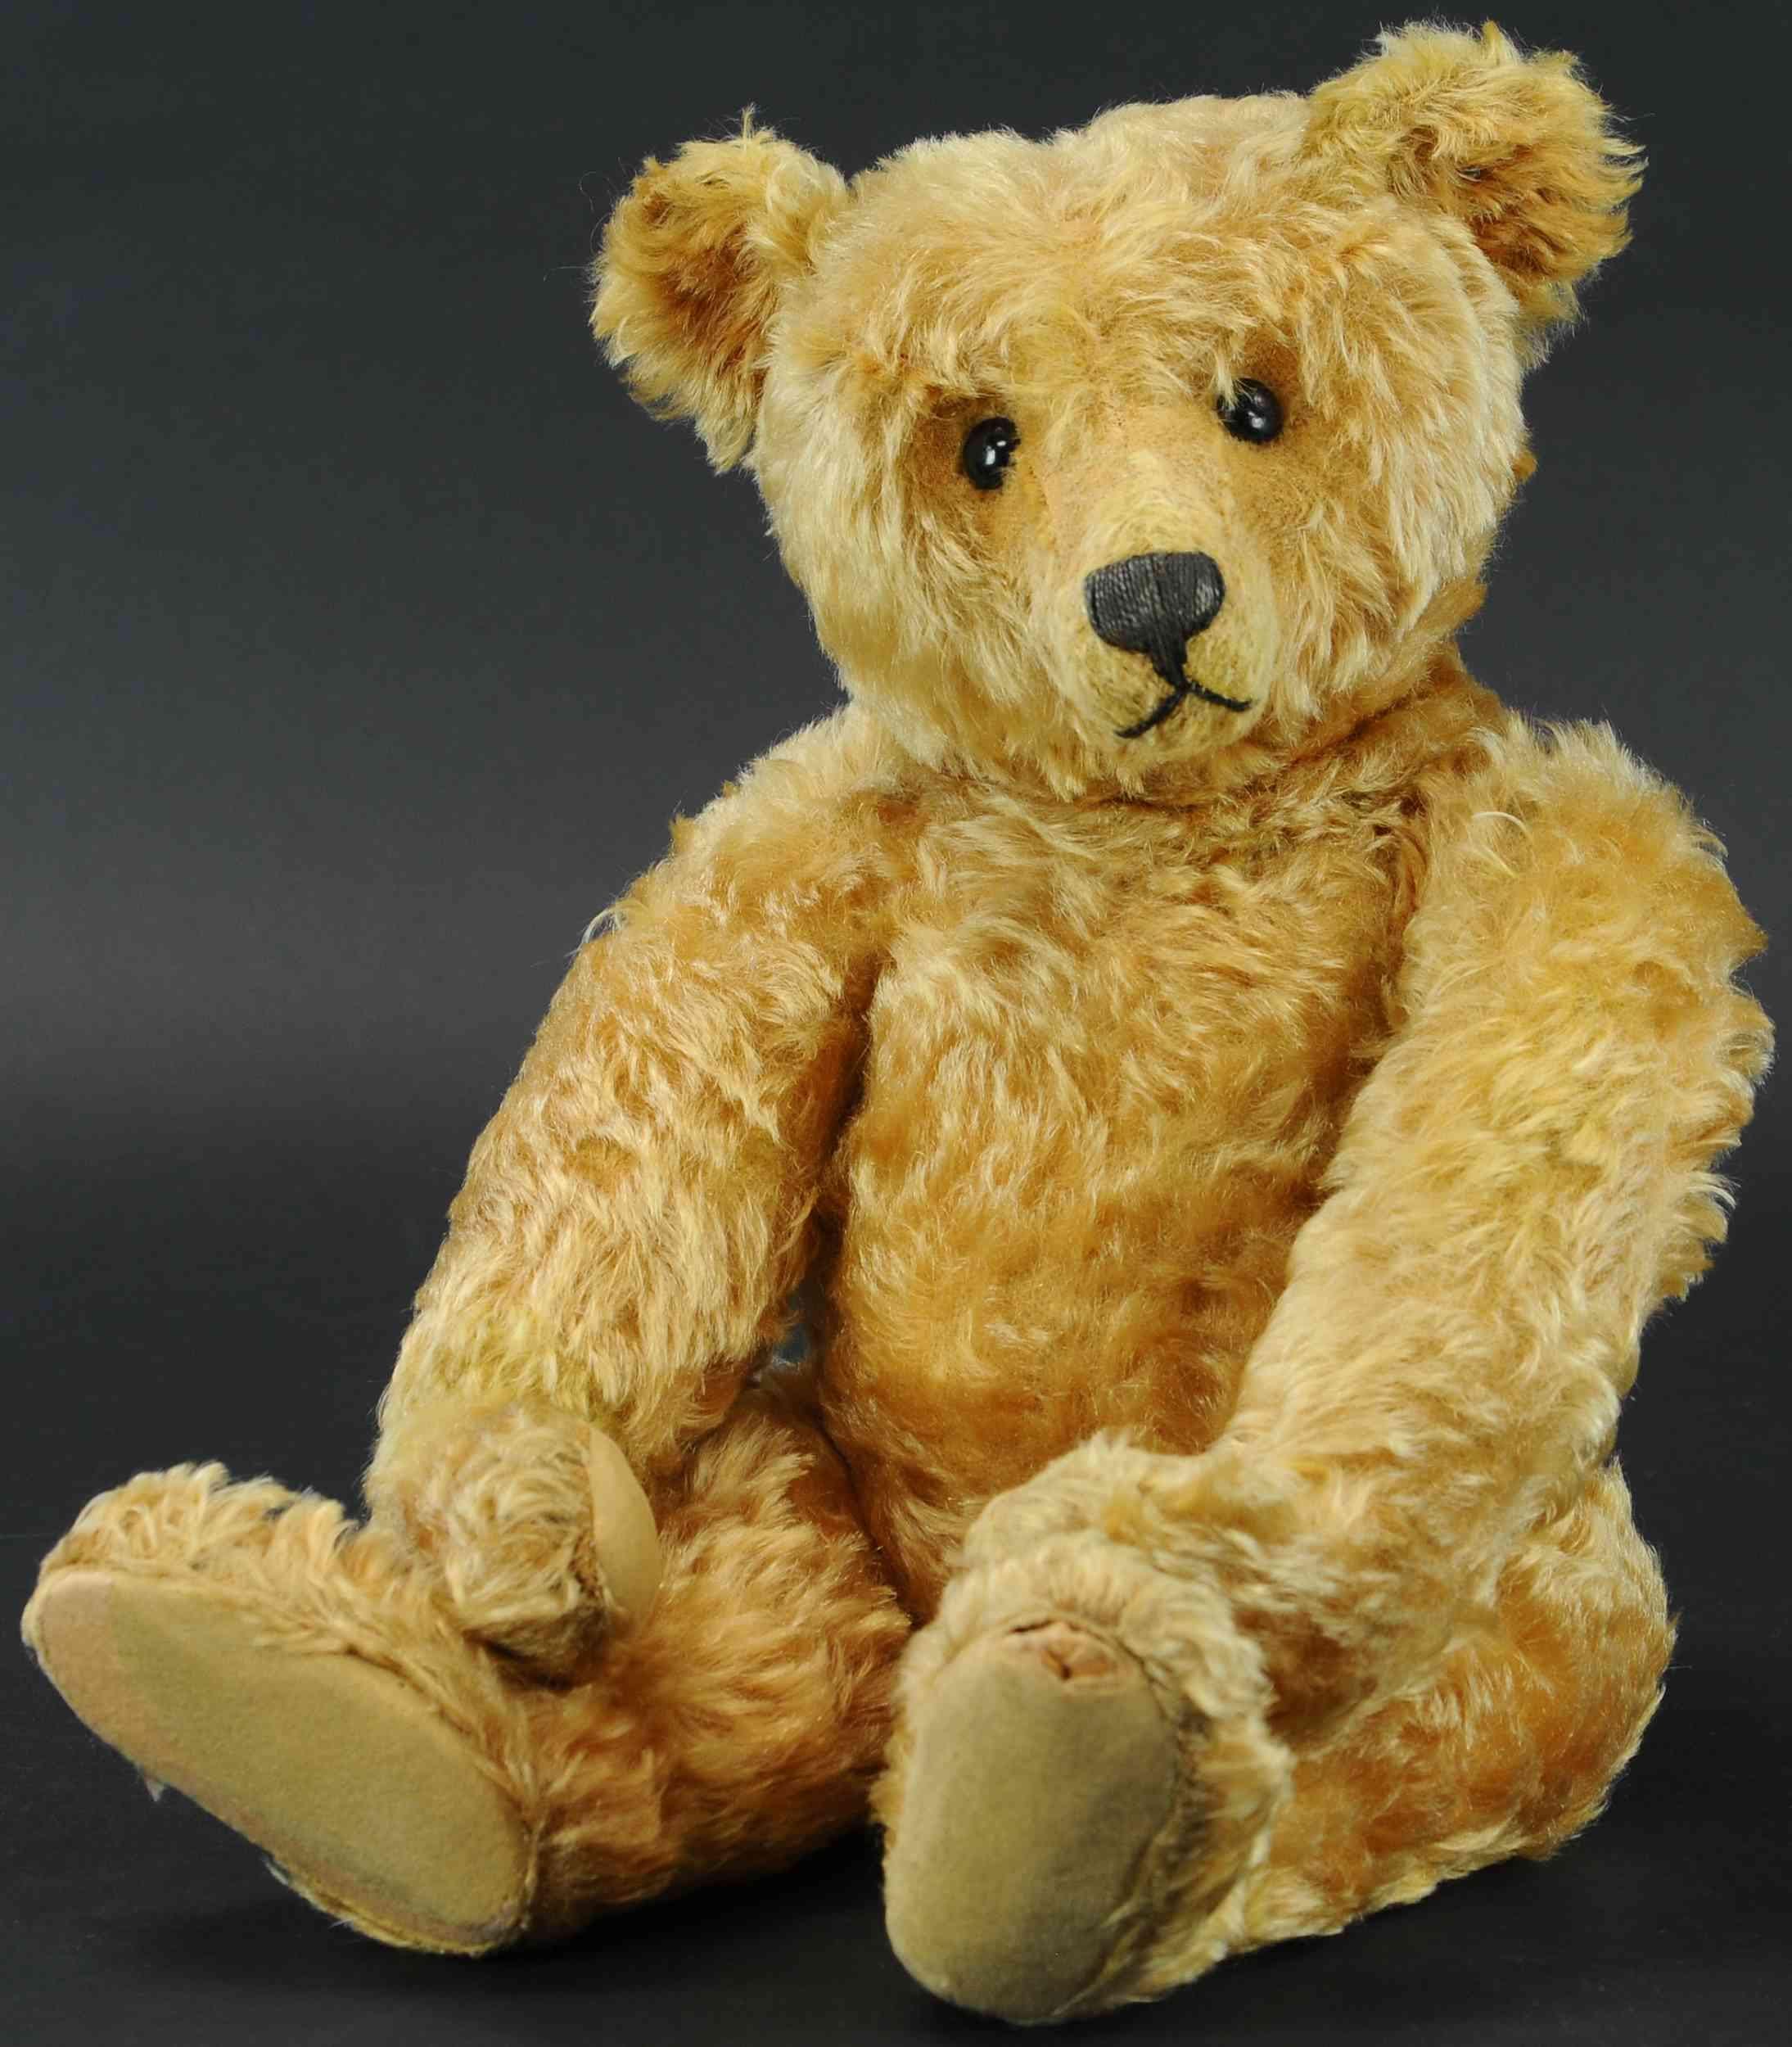 10 of the Most Expensive Steiff Bears You've Probably Never Seen ...